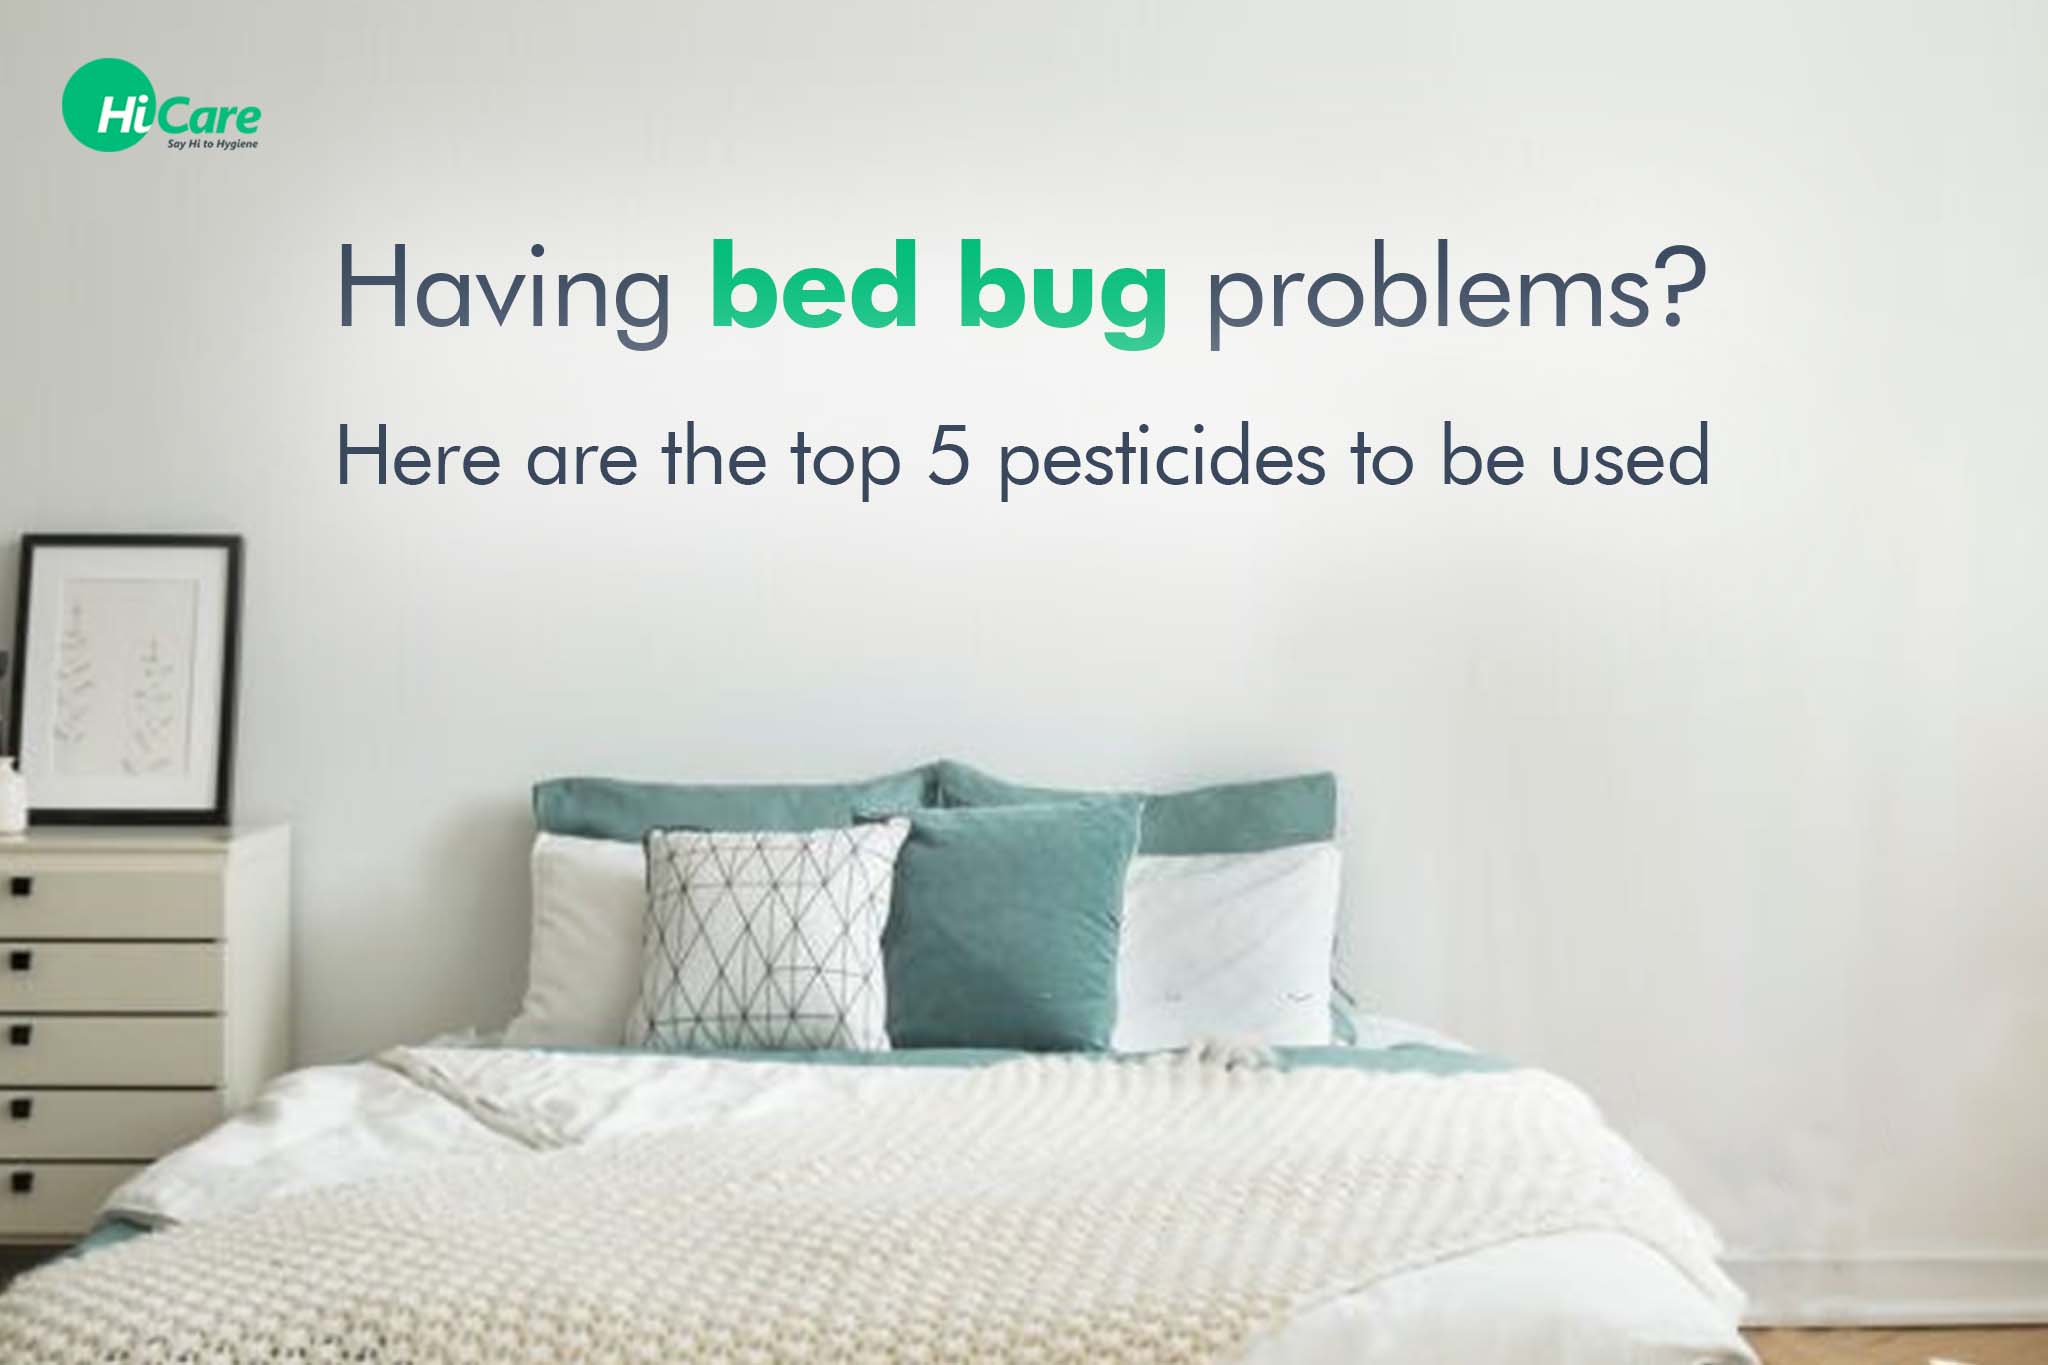 Having Bed Bug Problems? Here are The Top 5 Pesticides to be Used!